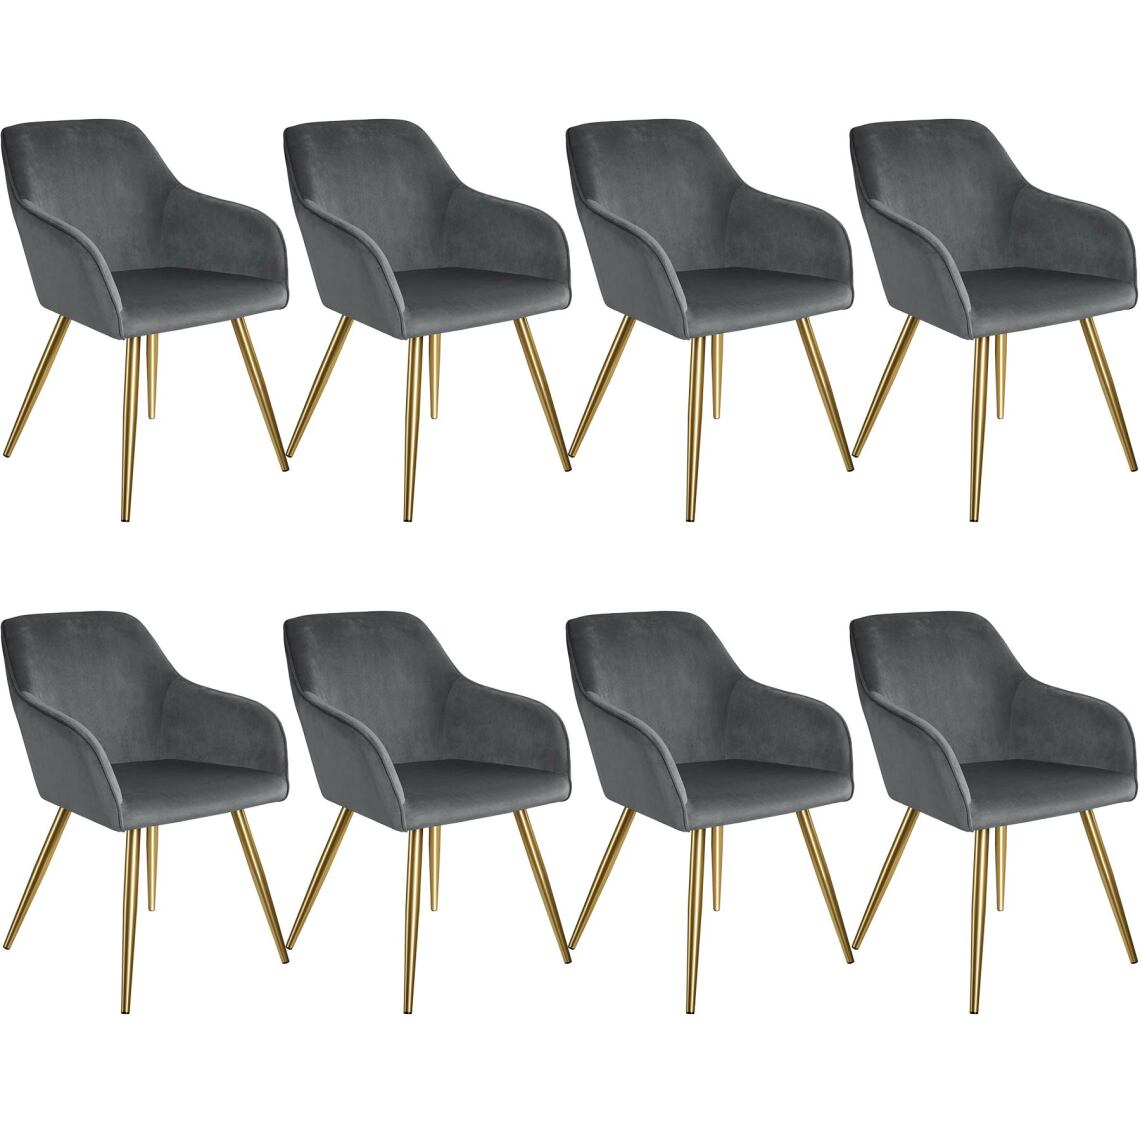 Tectake - 8 Chaises MARILYN Effet Velours Style Scandinave - gris foncé/or - Chaises